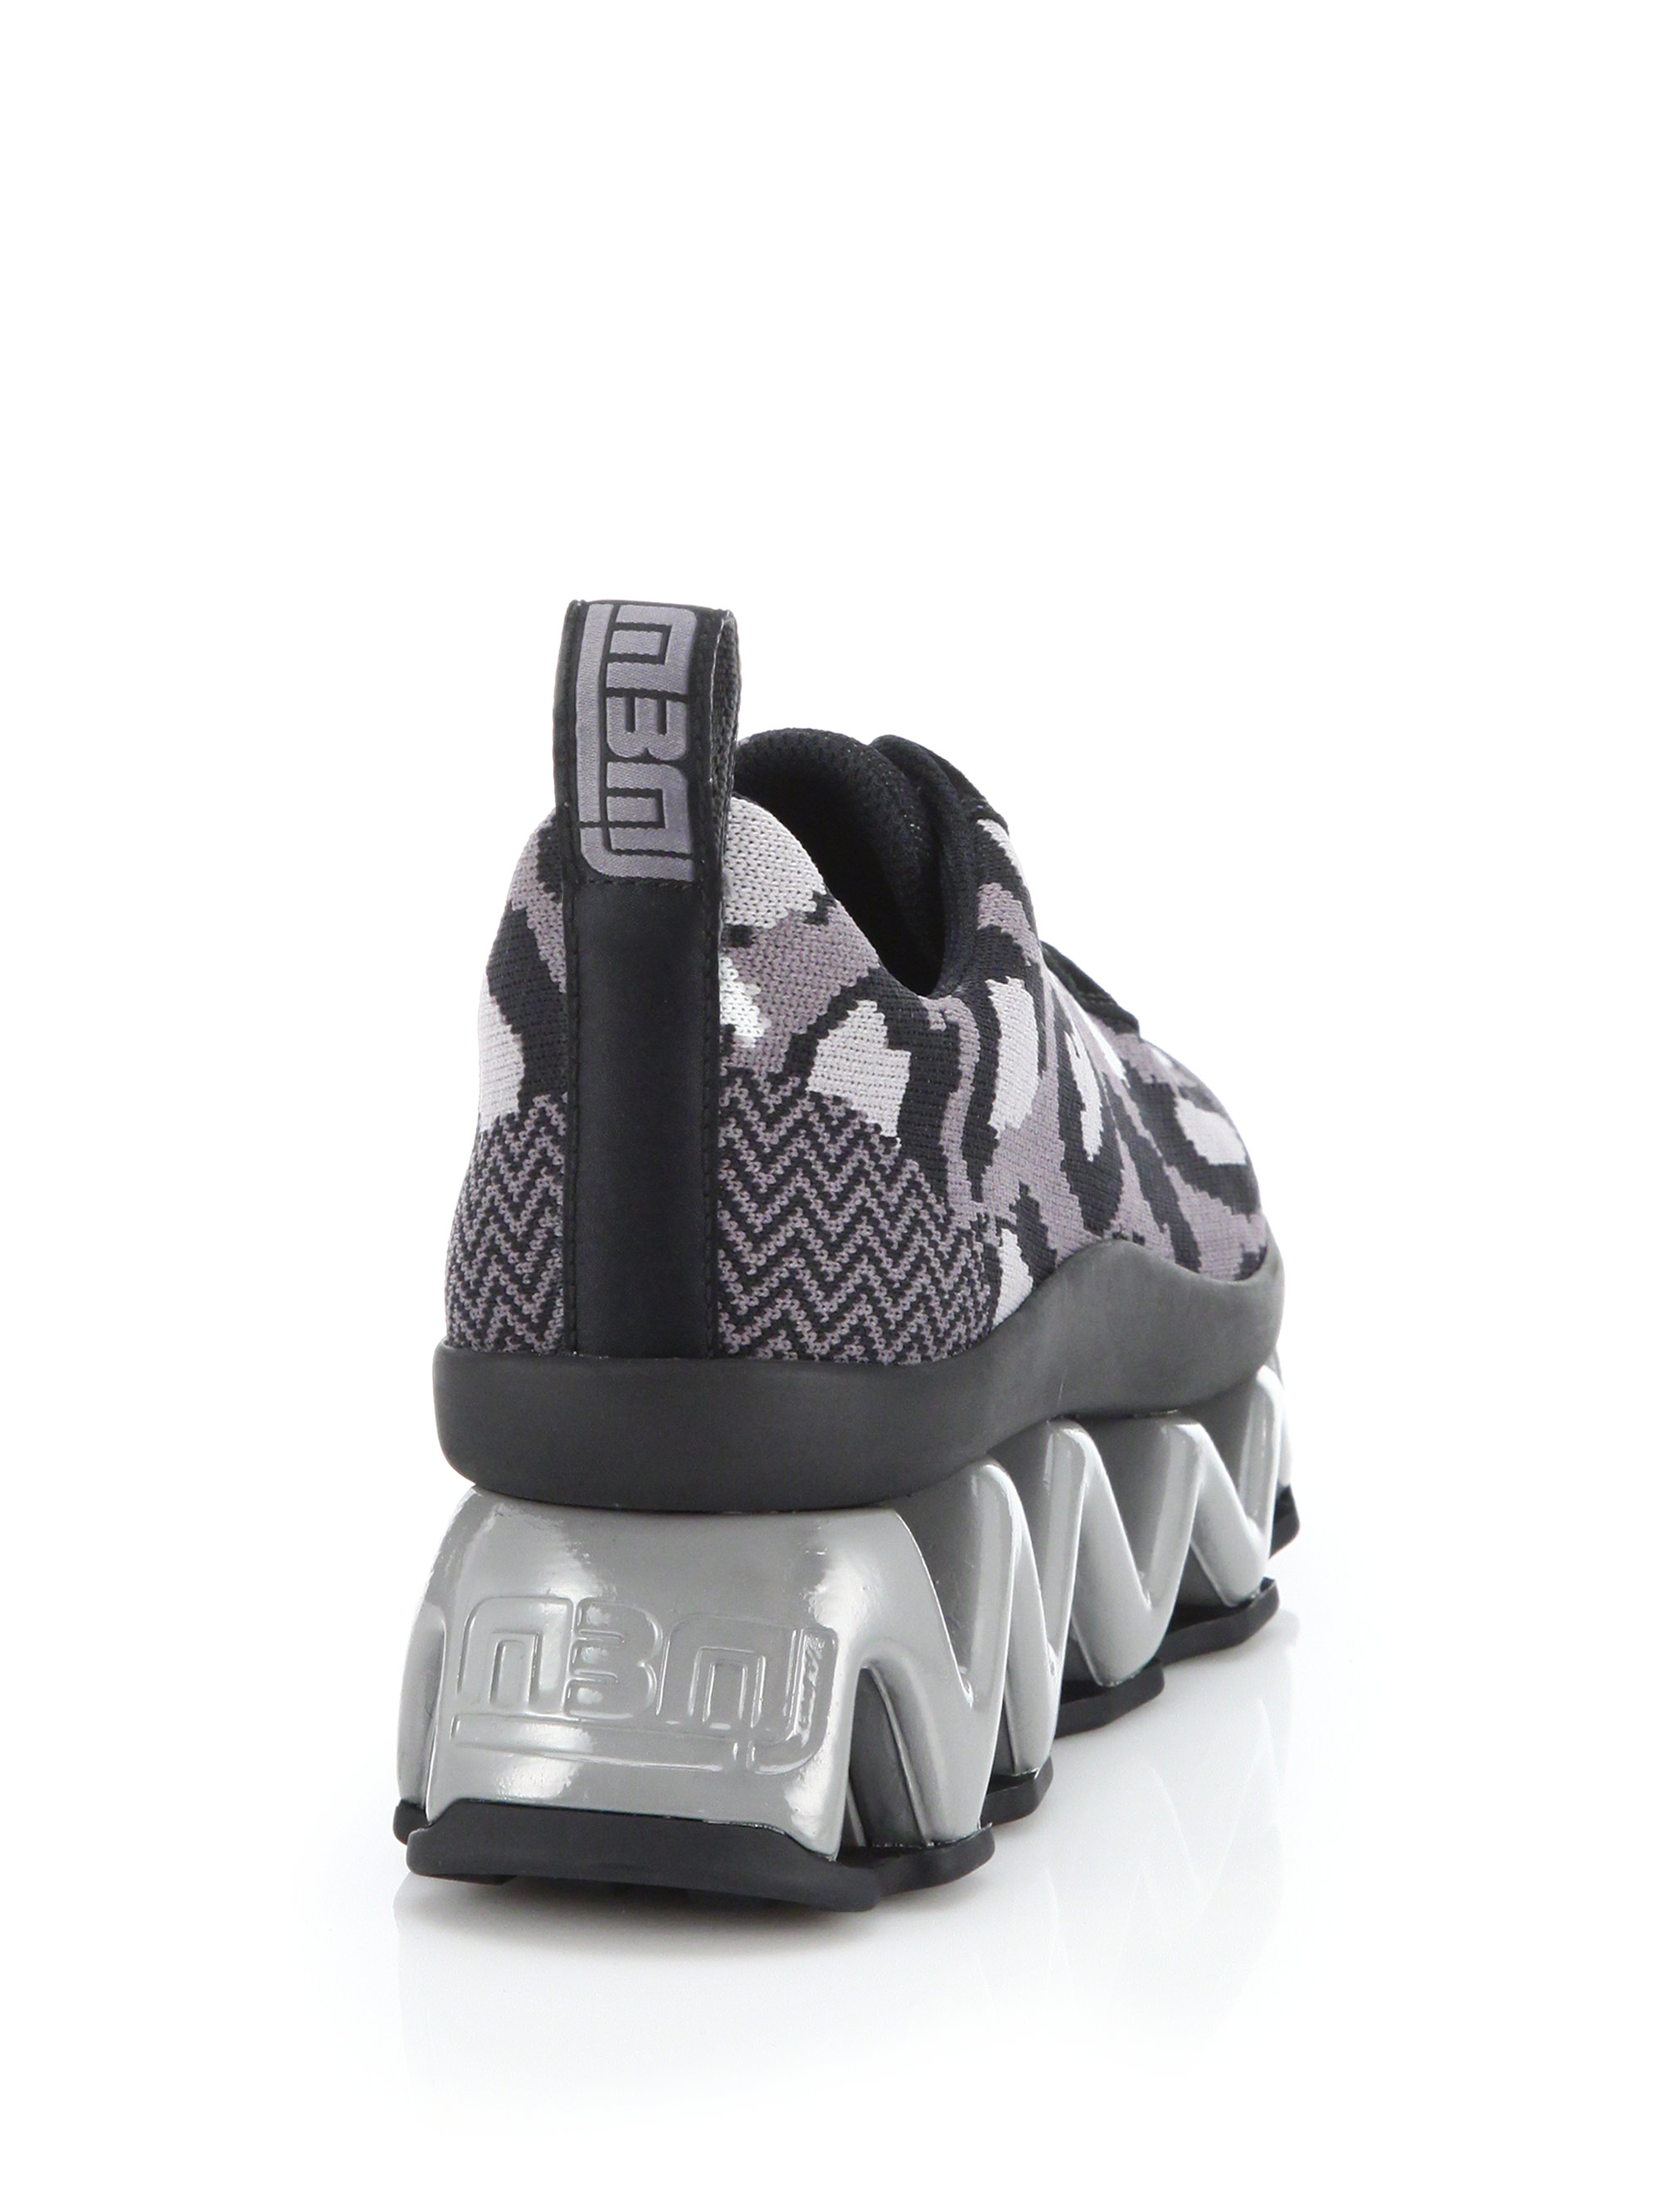 Marc By Marc Jacobs Ninja Wave Textile & Leather Platform Sneakers in Grey  (Black) | Lyst